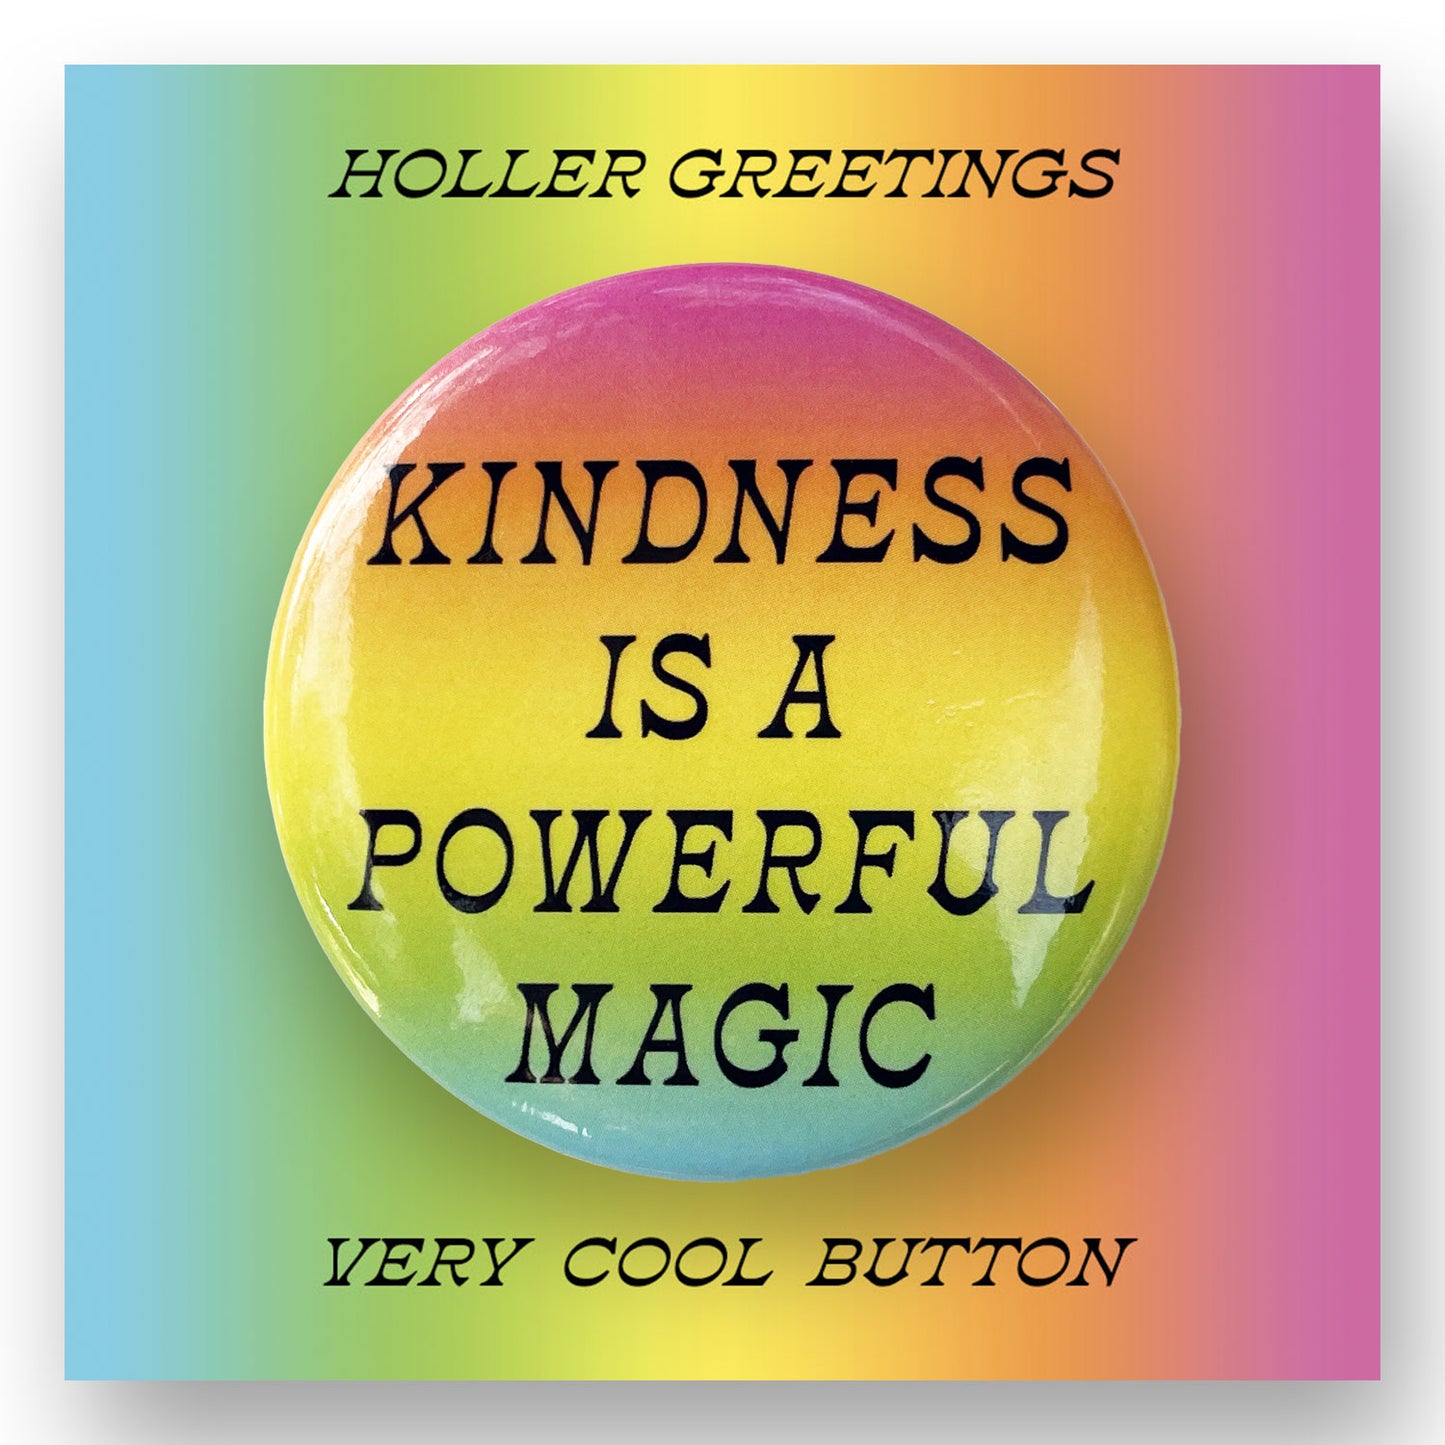 Kindness Is A Powerful Magic | 2.25" Big Button